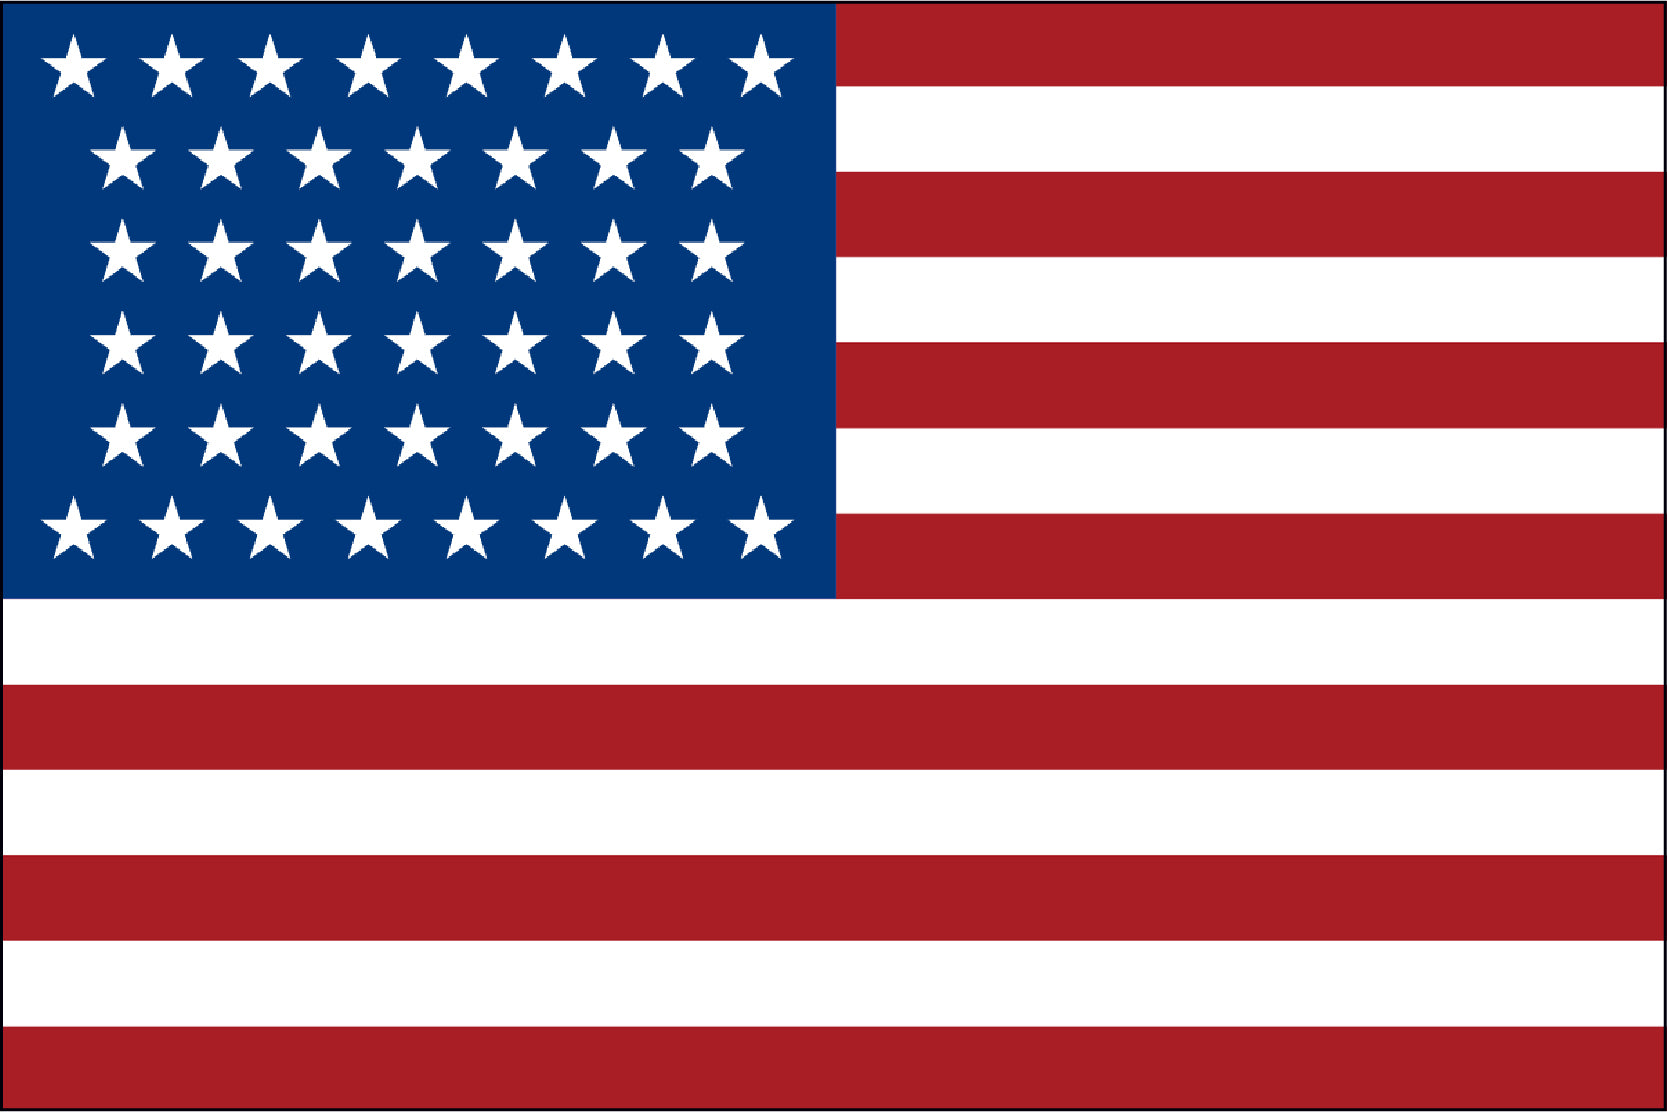 44 Star Old Glory Flag - LEAD TIMES ARE CURRENTLY RUNNING 6-8 WEEKS